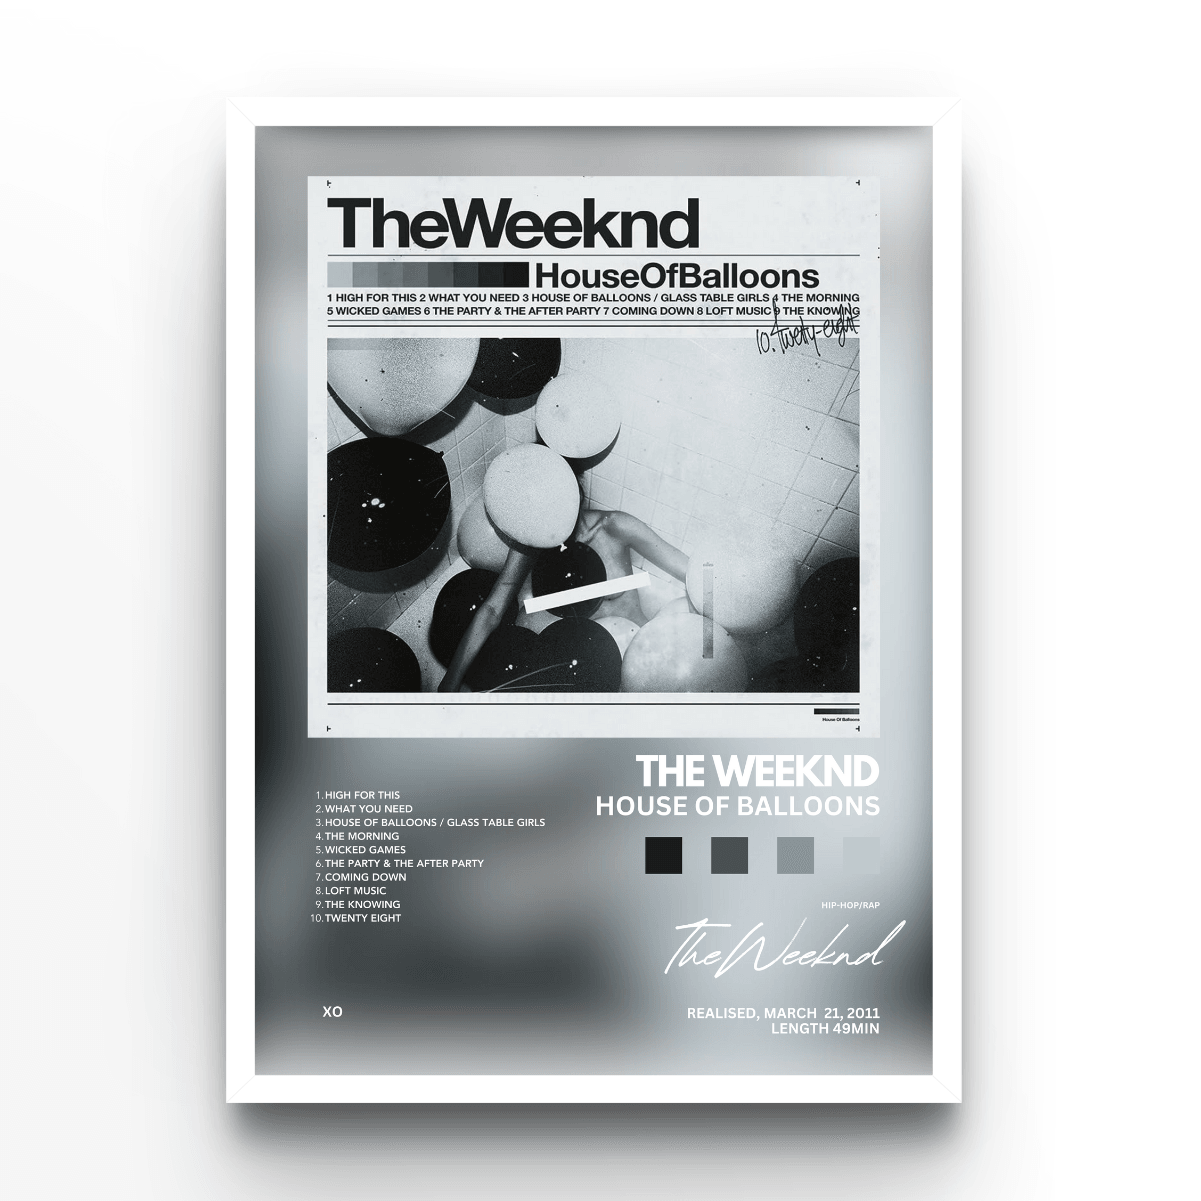 The Weeknd House of balloons - A4, A3, A2 Posters Base - Poster Print Shop / Art Prints / PostersBase